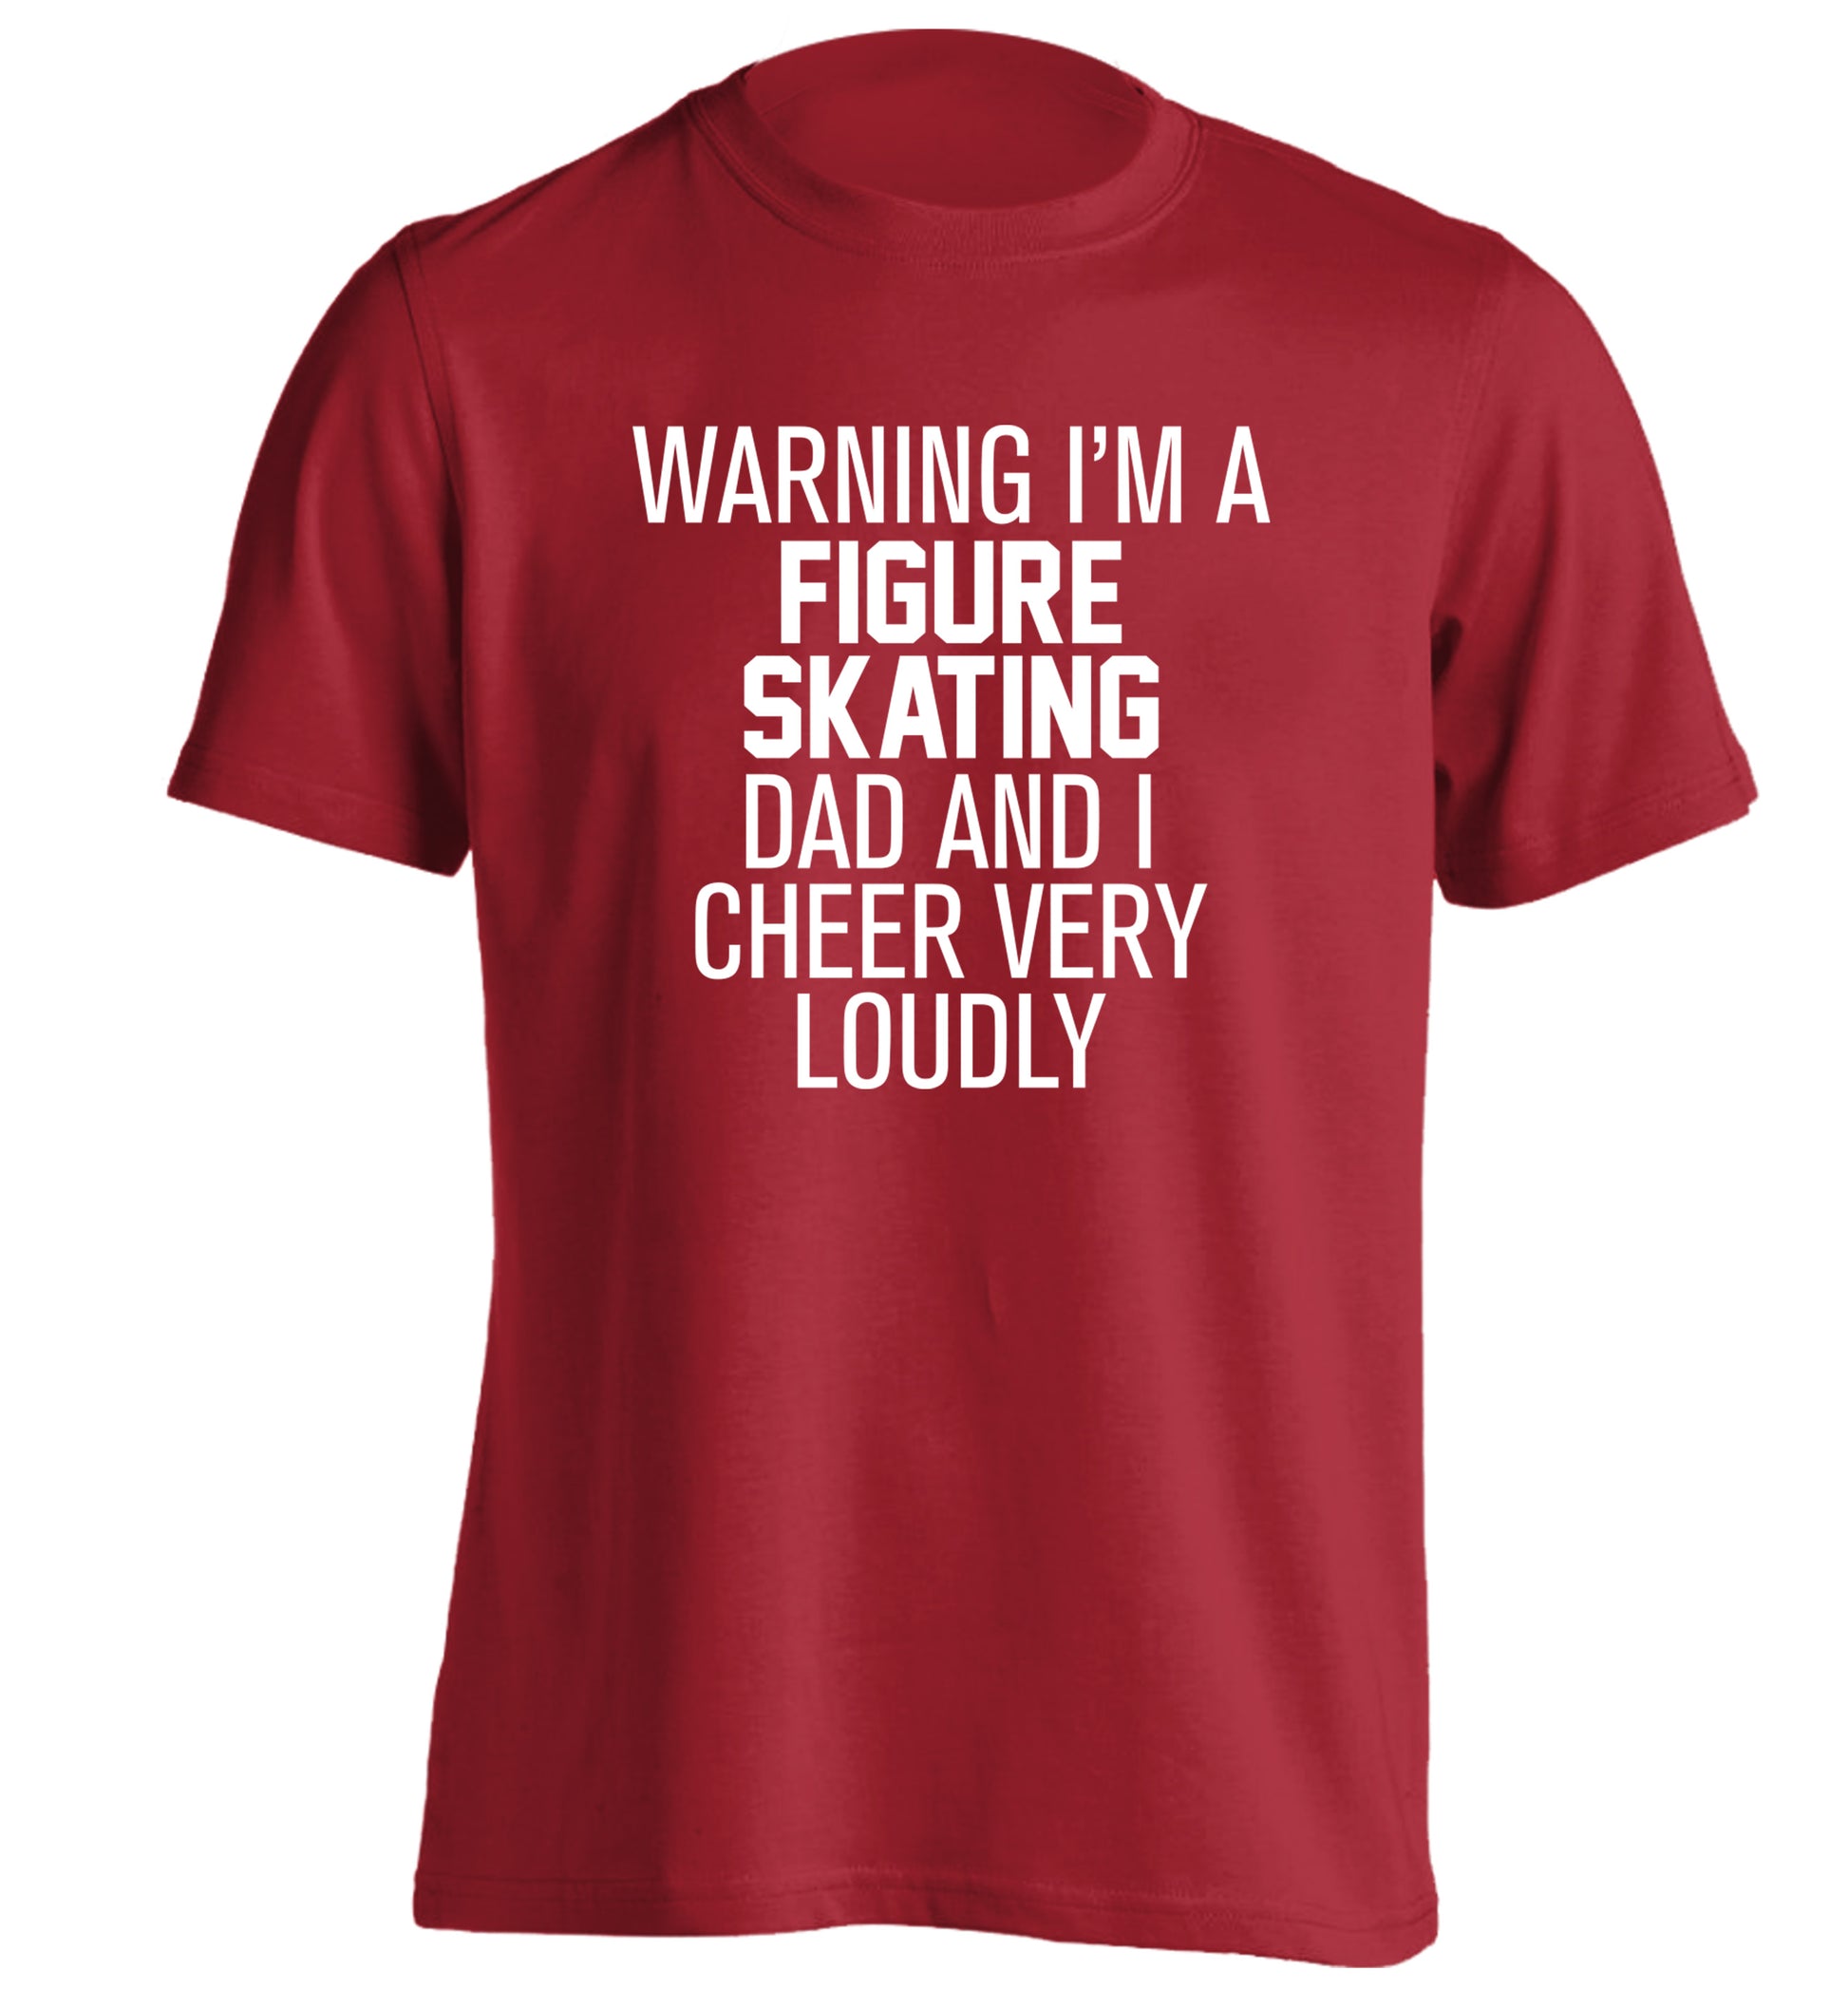 Warning I'm a figure skating dad and I cheer very loudly adults unisexred Tshirt 2XL